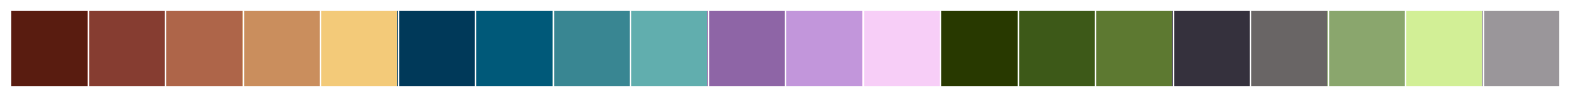 _images/creating_block_palettes_9_0.png